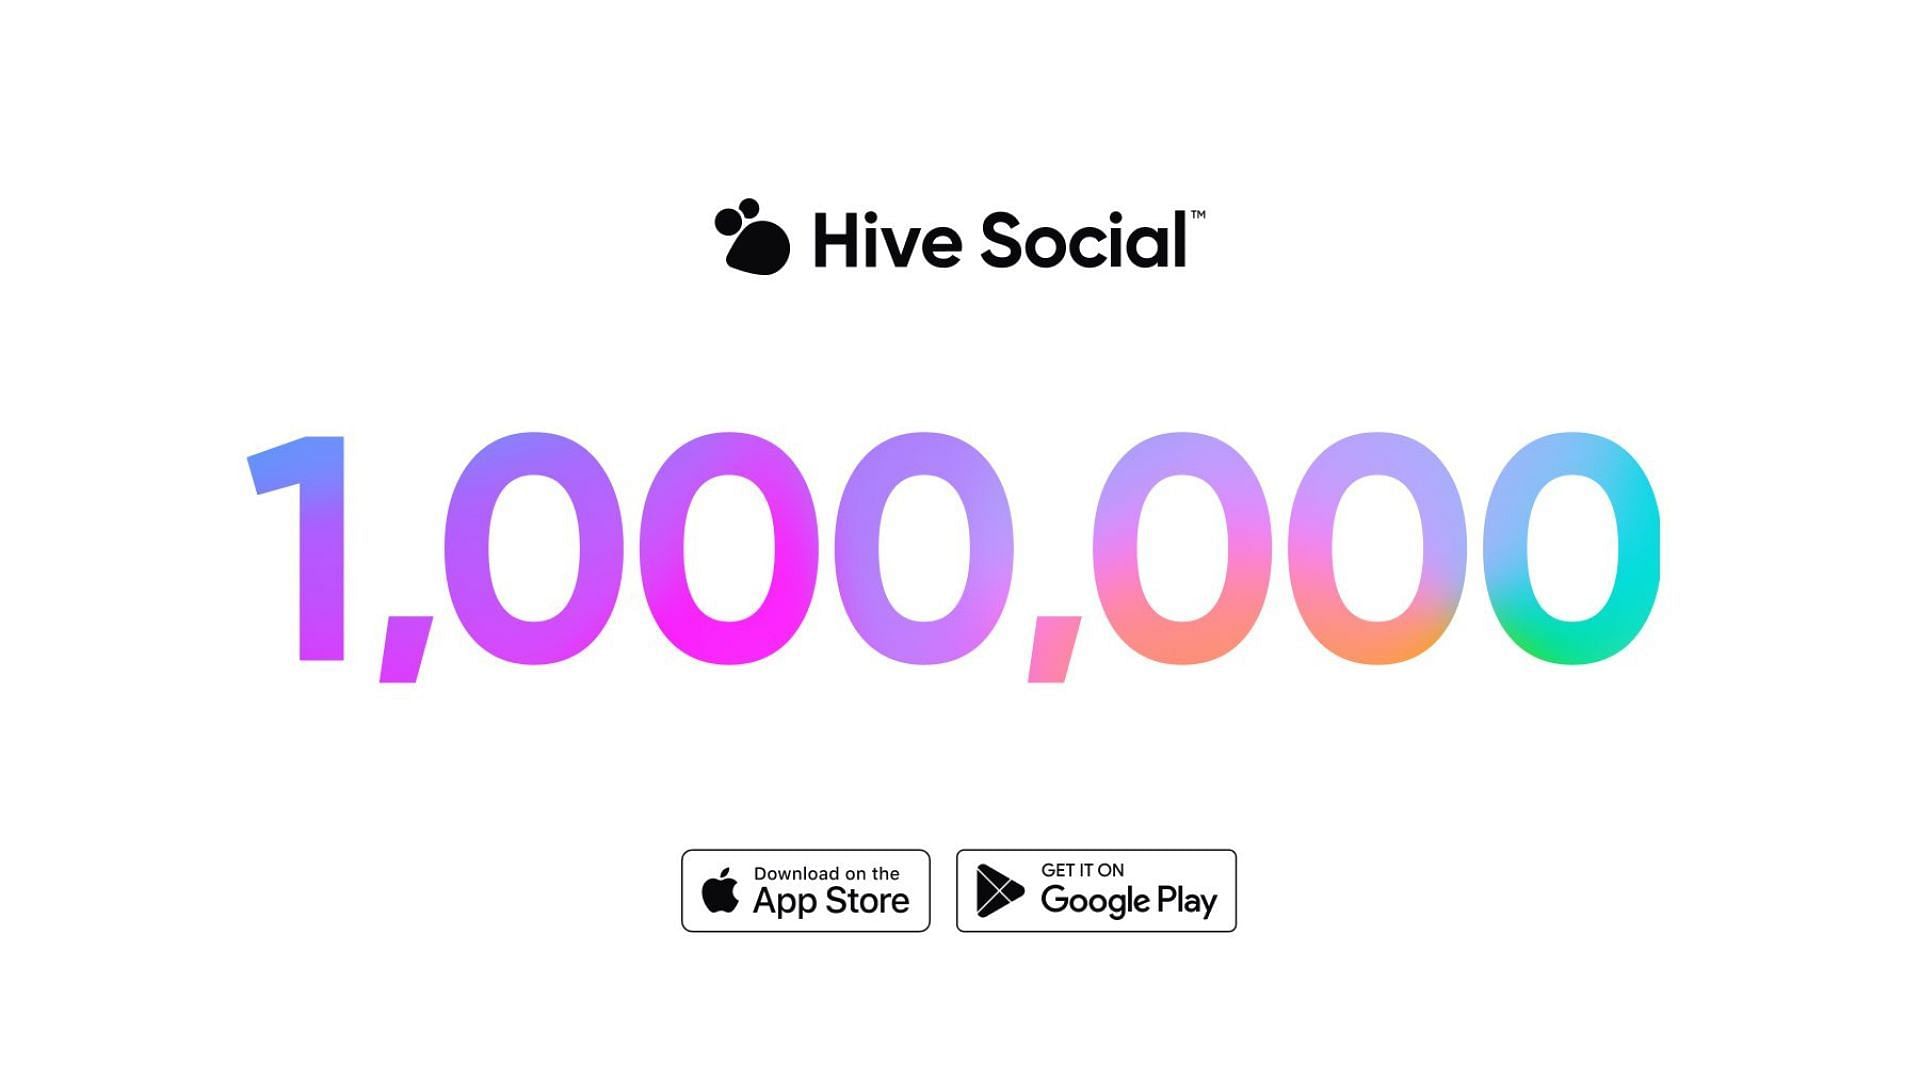 Hive Social recently celebrated hitting one million users (Image via @TheHIVE_Social/Twitter)